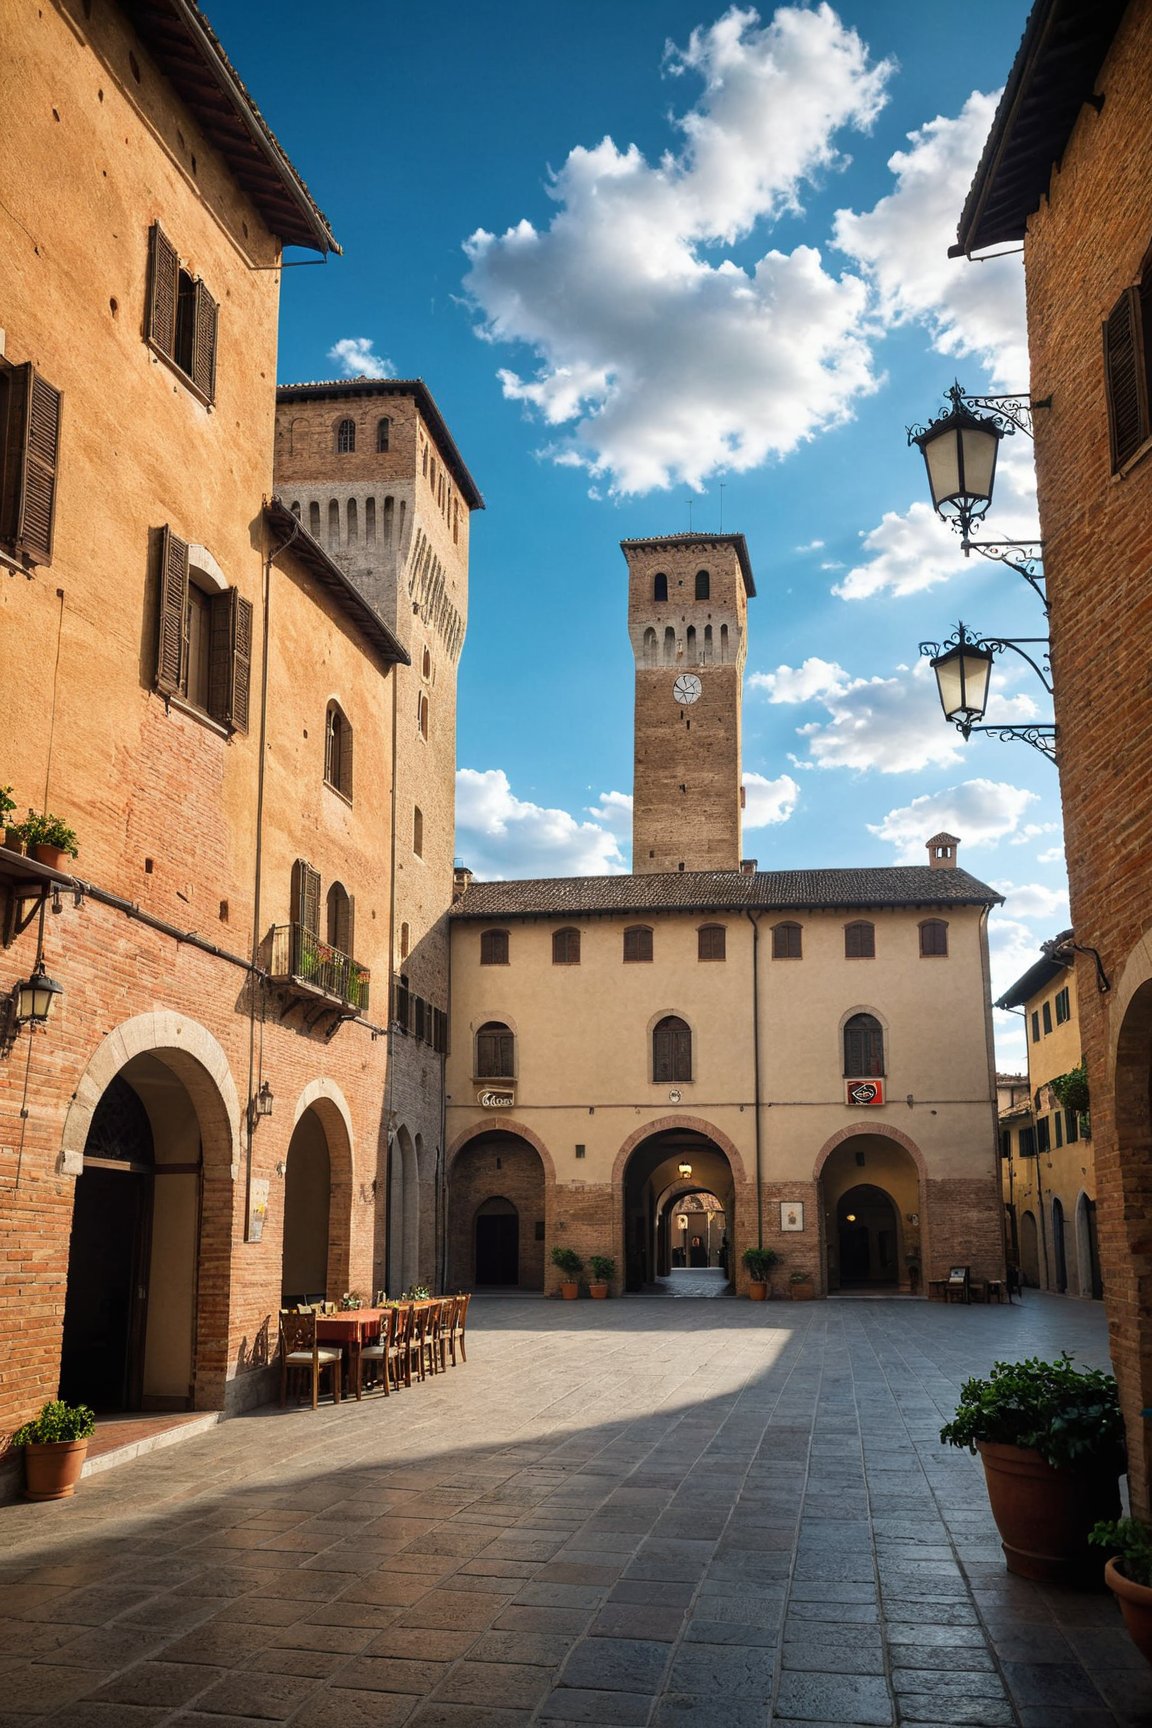 (Documentary photograph:1.3) of a wonderful (medieval plaza in Italy:1.4), 14th century, (golden ratio:1.3), (medieval architecture:1.3),(mullioned windows:1.3),(brick wall:1.1), (tower with merlons:1.2), overlooking the plaza, beautiful blue sky with imposing cumulonembus clouds, BREAK shot on Canon EOS 5D, from below, Fujicolor Pro film, in the style of Miko Lagerstedt/Liam Wong/Nan Goldin/Lee Friedlander, (photorealistic:1.3), (soft diffused lighting:1.2), vignette, highest quality, original shot. BREAK Front view, well-lit, (perfect focus:1.2), award winning, detailed and intricate, masterpiece, itacstl,real_booster,itacstl